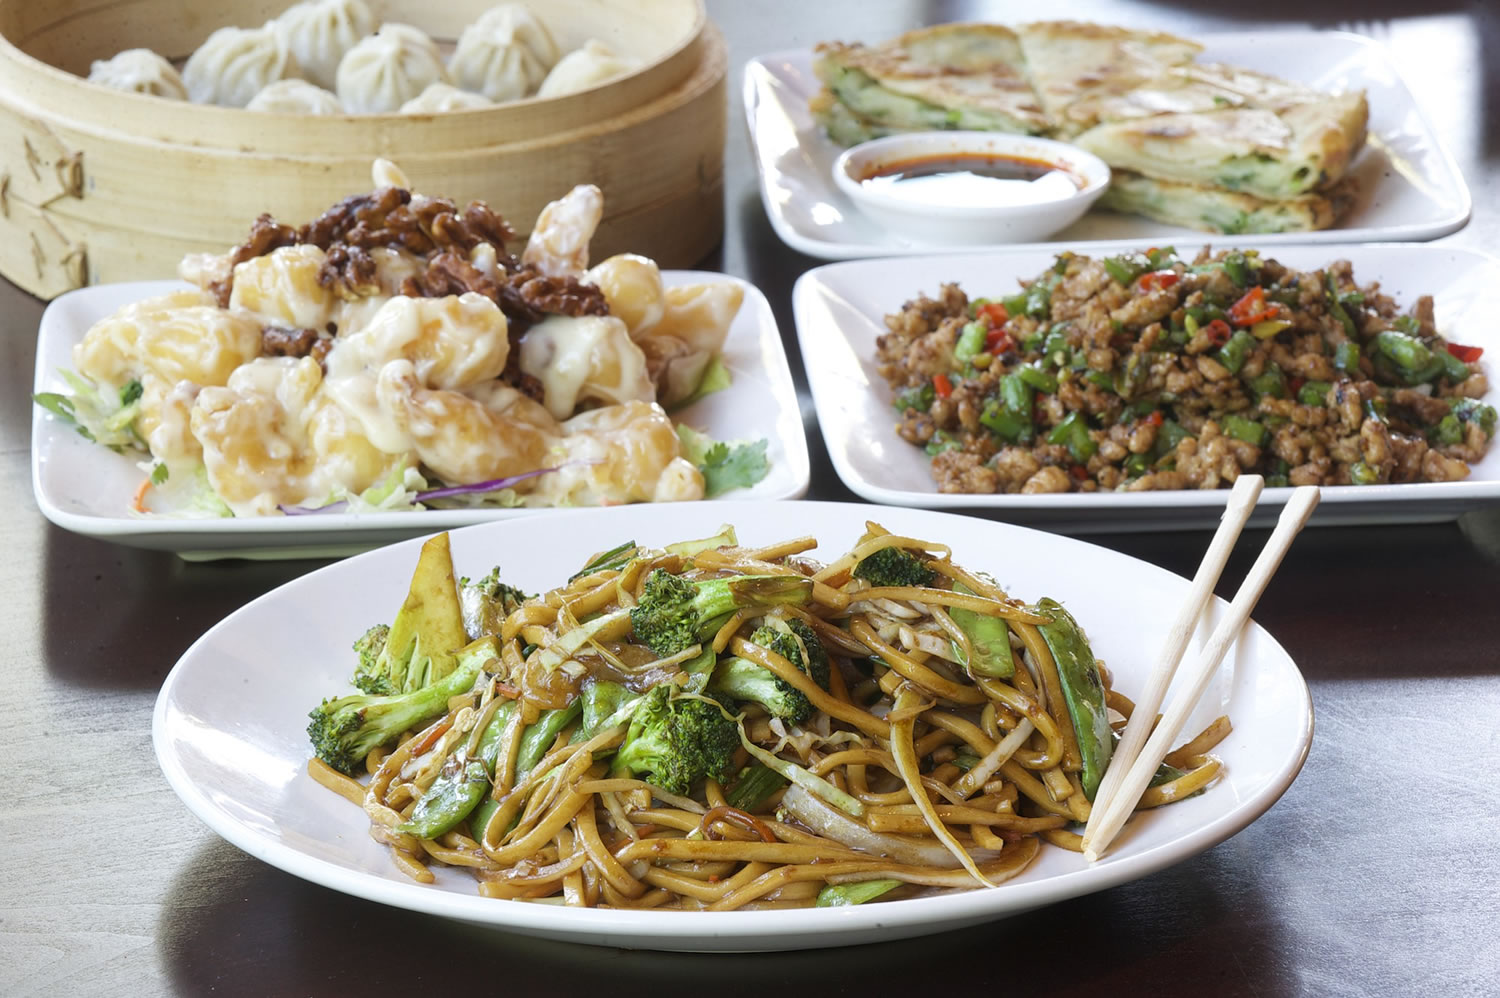 Chow mein with vegetables, crispy walnut prawns, chopped pepper hot chicken, green onion pancakes and steamed dumplings are served Oct.